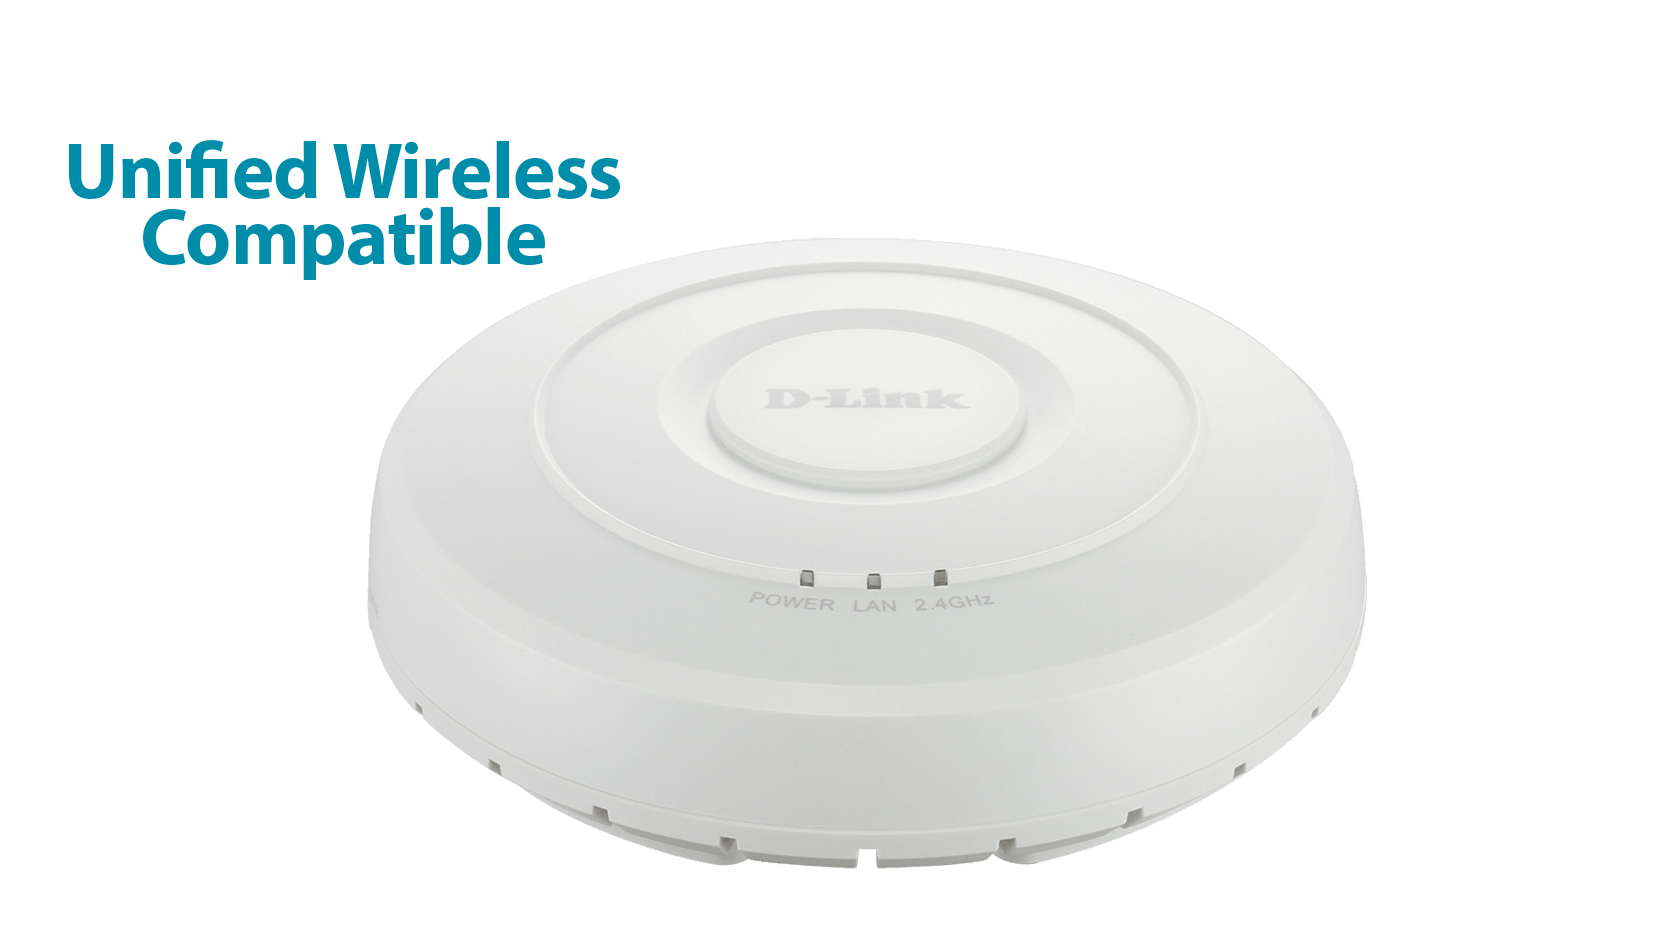 DWL 2600 AP Unified Wireless Compatible